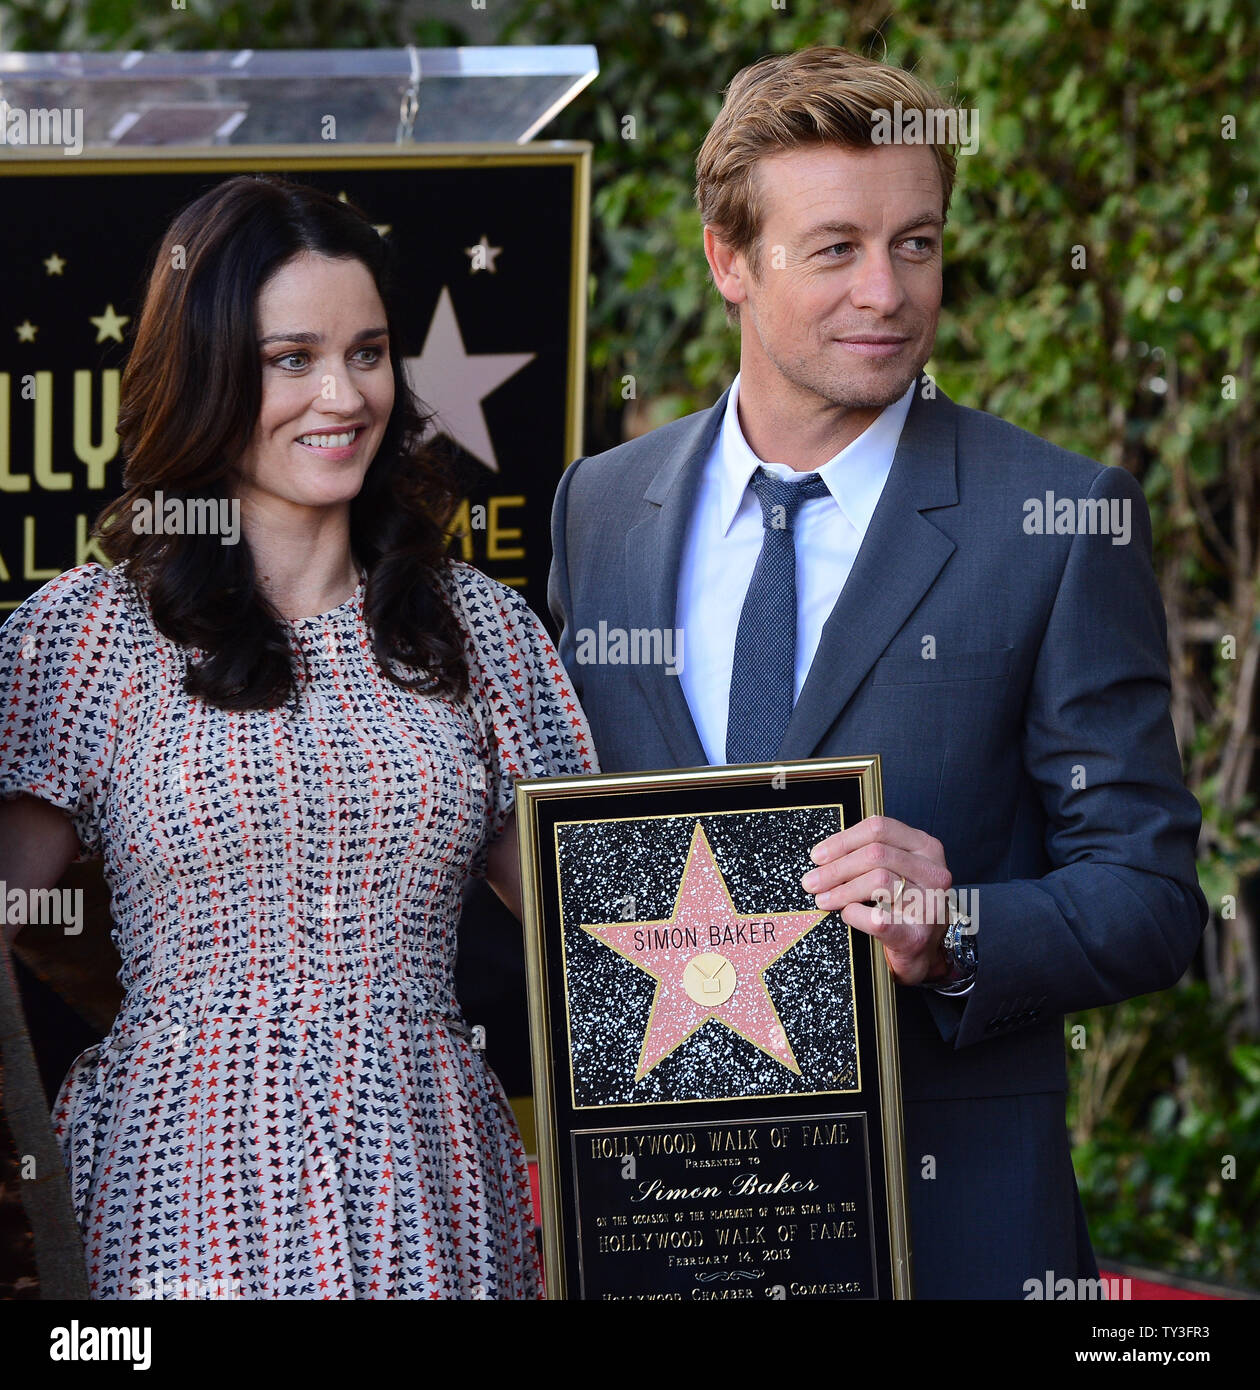 Australian actor Simon Baker poses with actress Robin Tunney, his co-star on the TV series 'The Mentalist', during an unveiling ceremony, honoring him with the 2,490th star on the Hollywood Walk of Fame in Los Angeles on February 14, 2013. UPI/Jim Ruymen Stock Photo